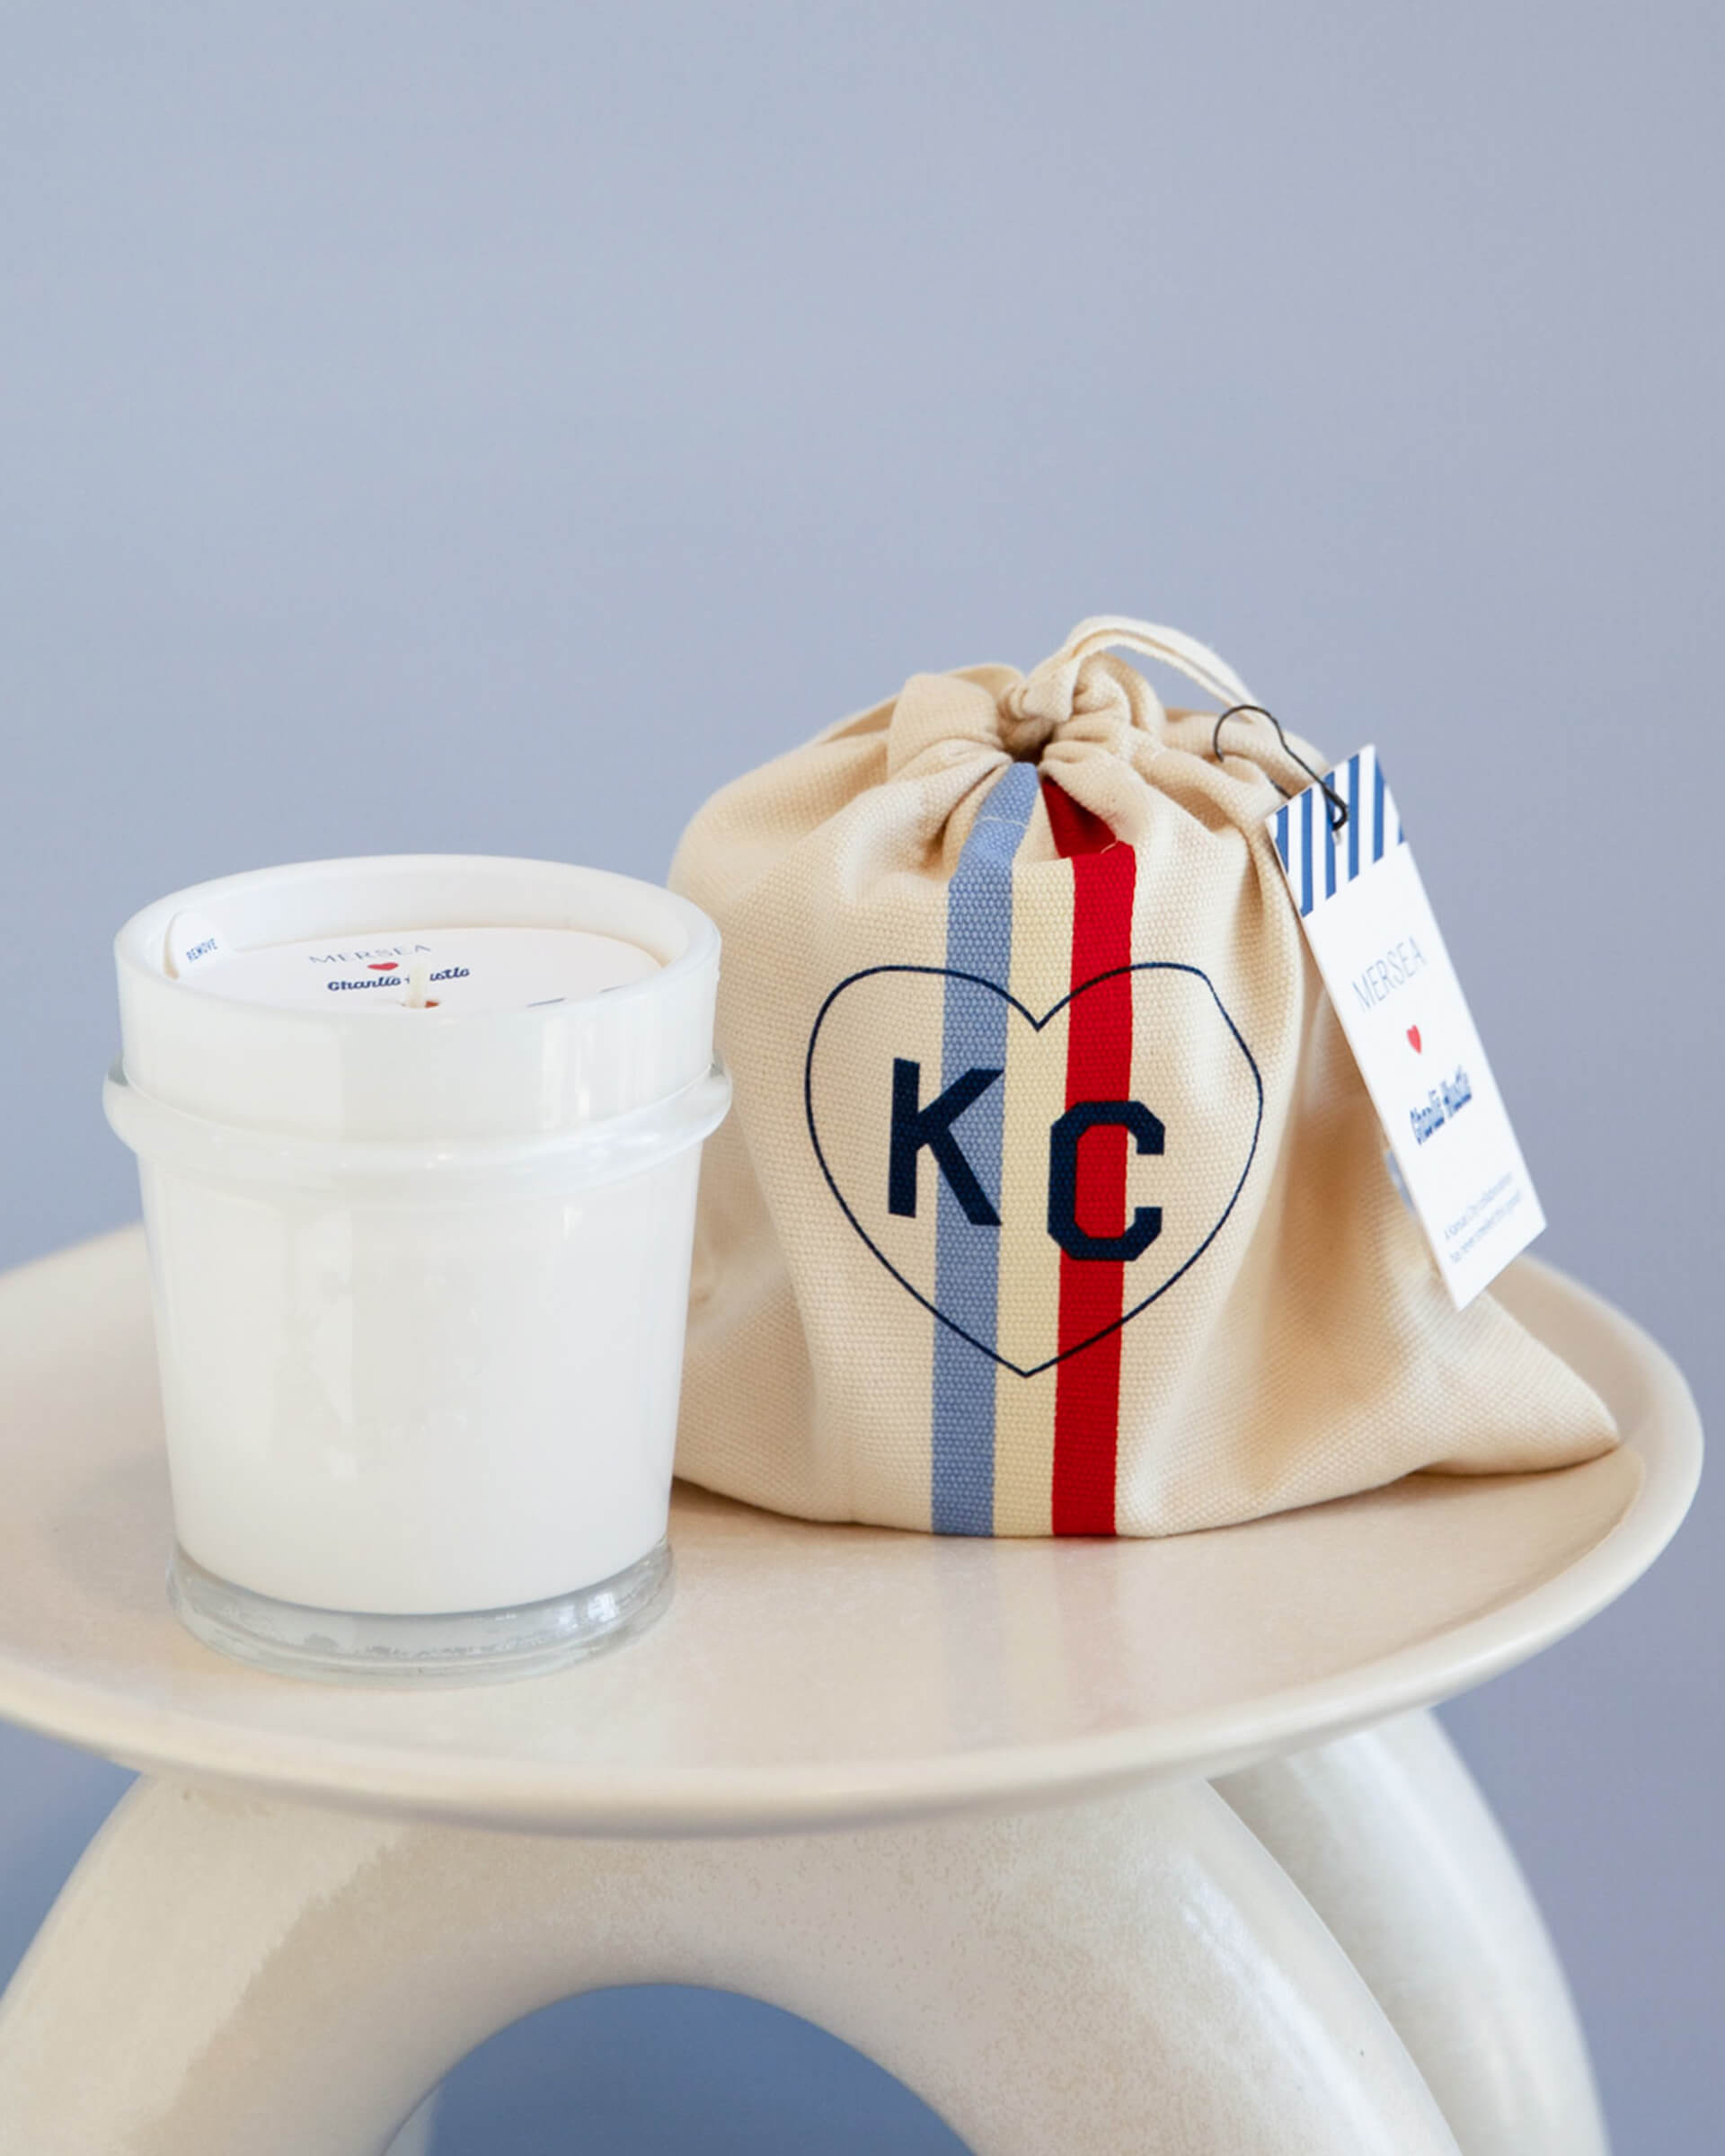 mersea colab voyager candle next to KC inside heart on candle bag on stool